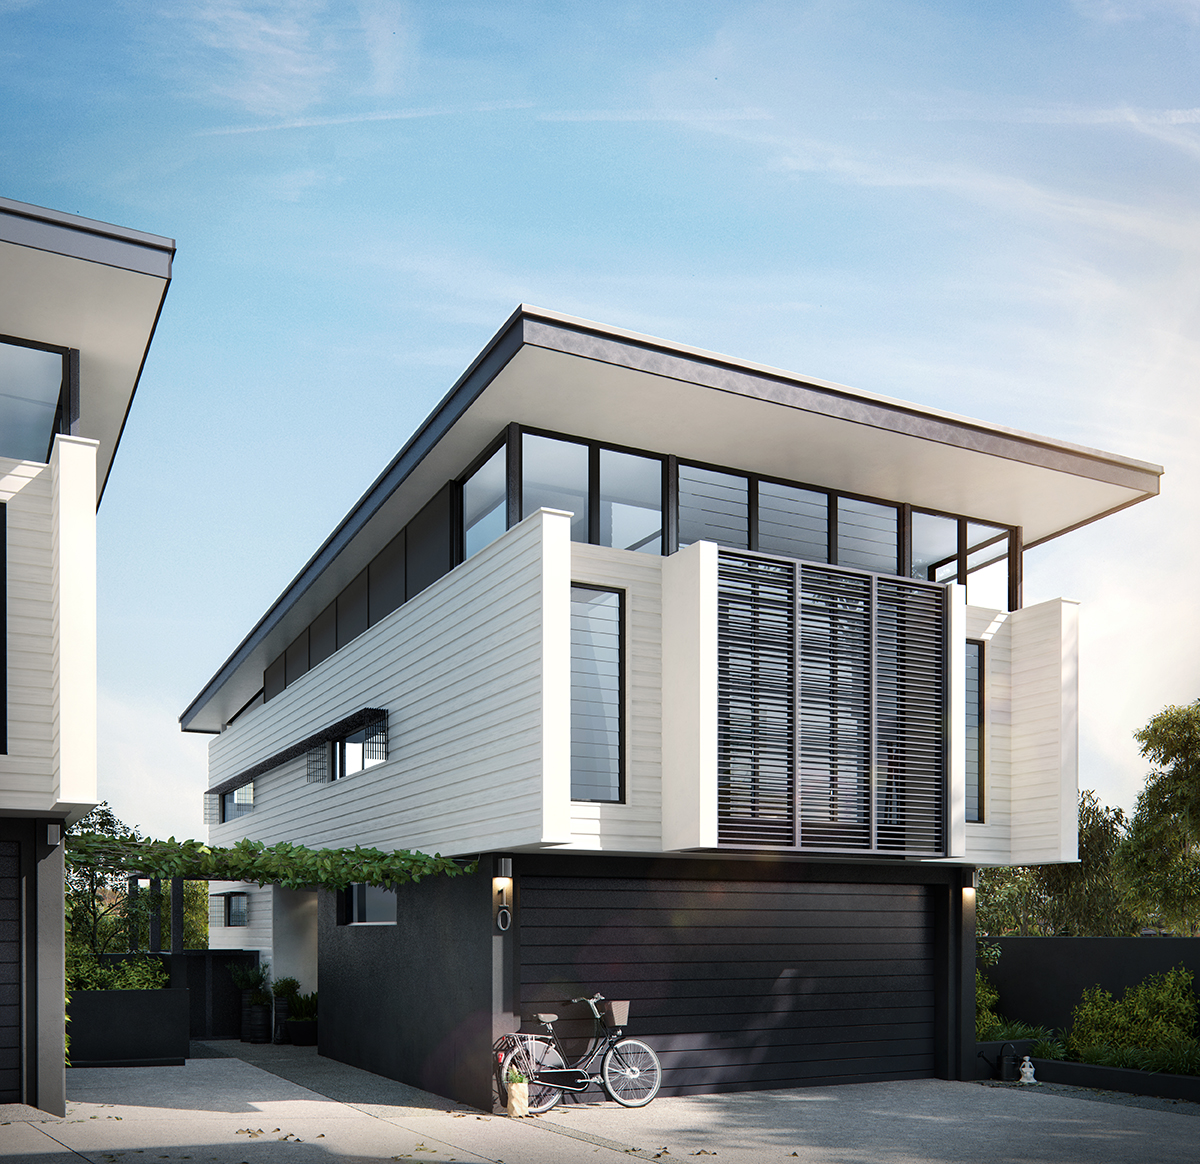 Duplex townhouse featuring contrasting black ground floor and white upper floor, adorned with timber cladding and aluminum battening. Sunlit interior with a sloped roof adorned with windows.